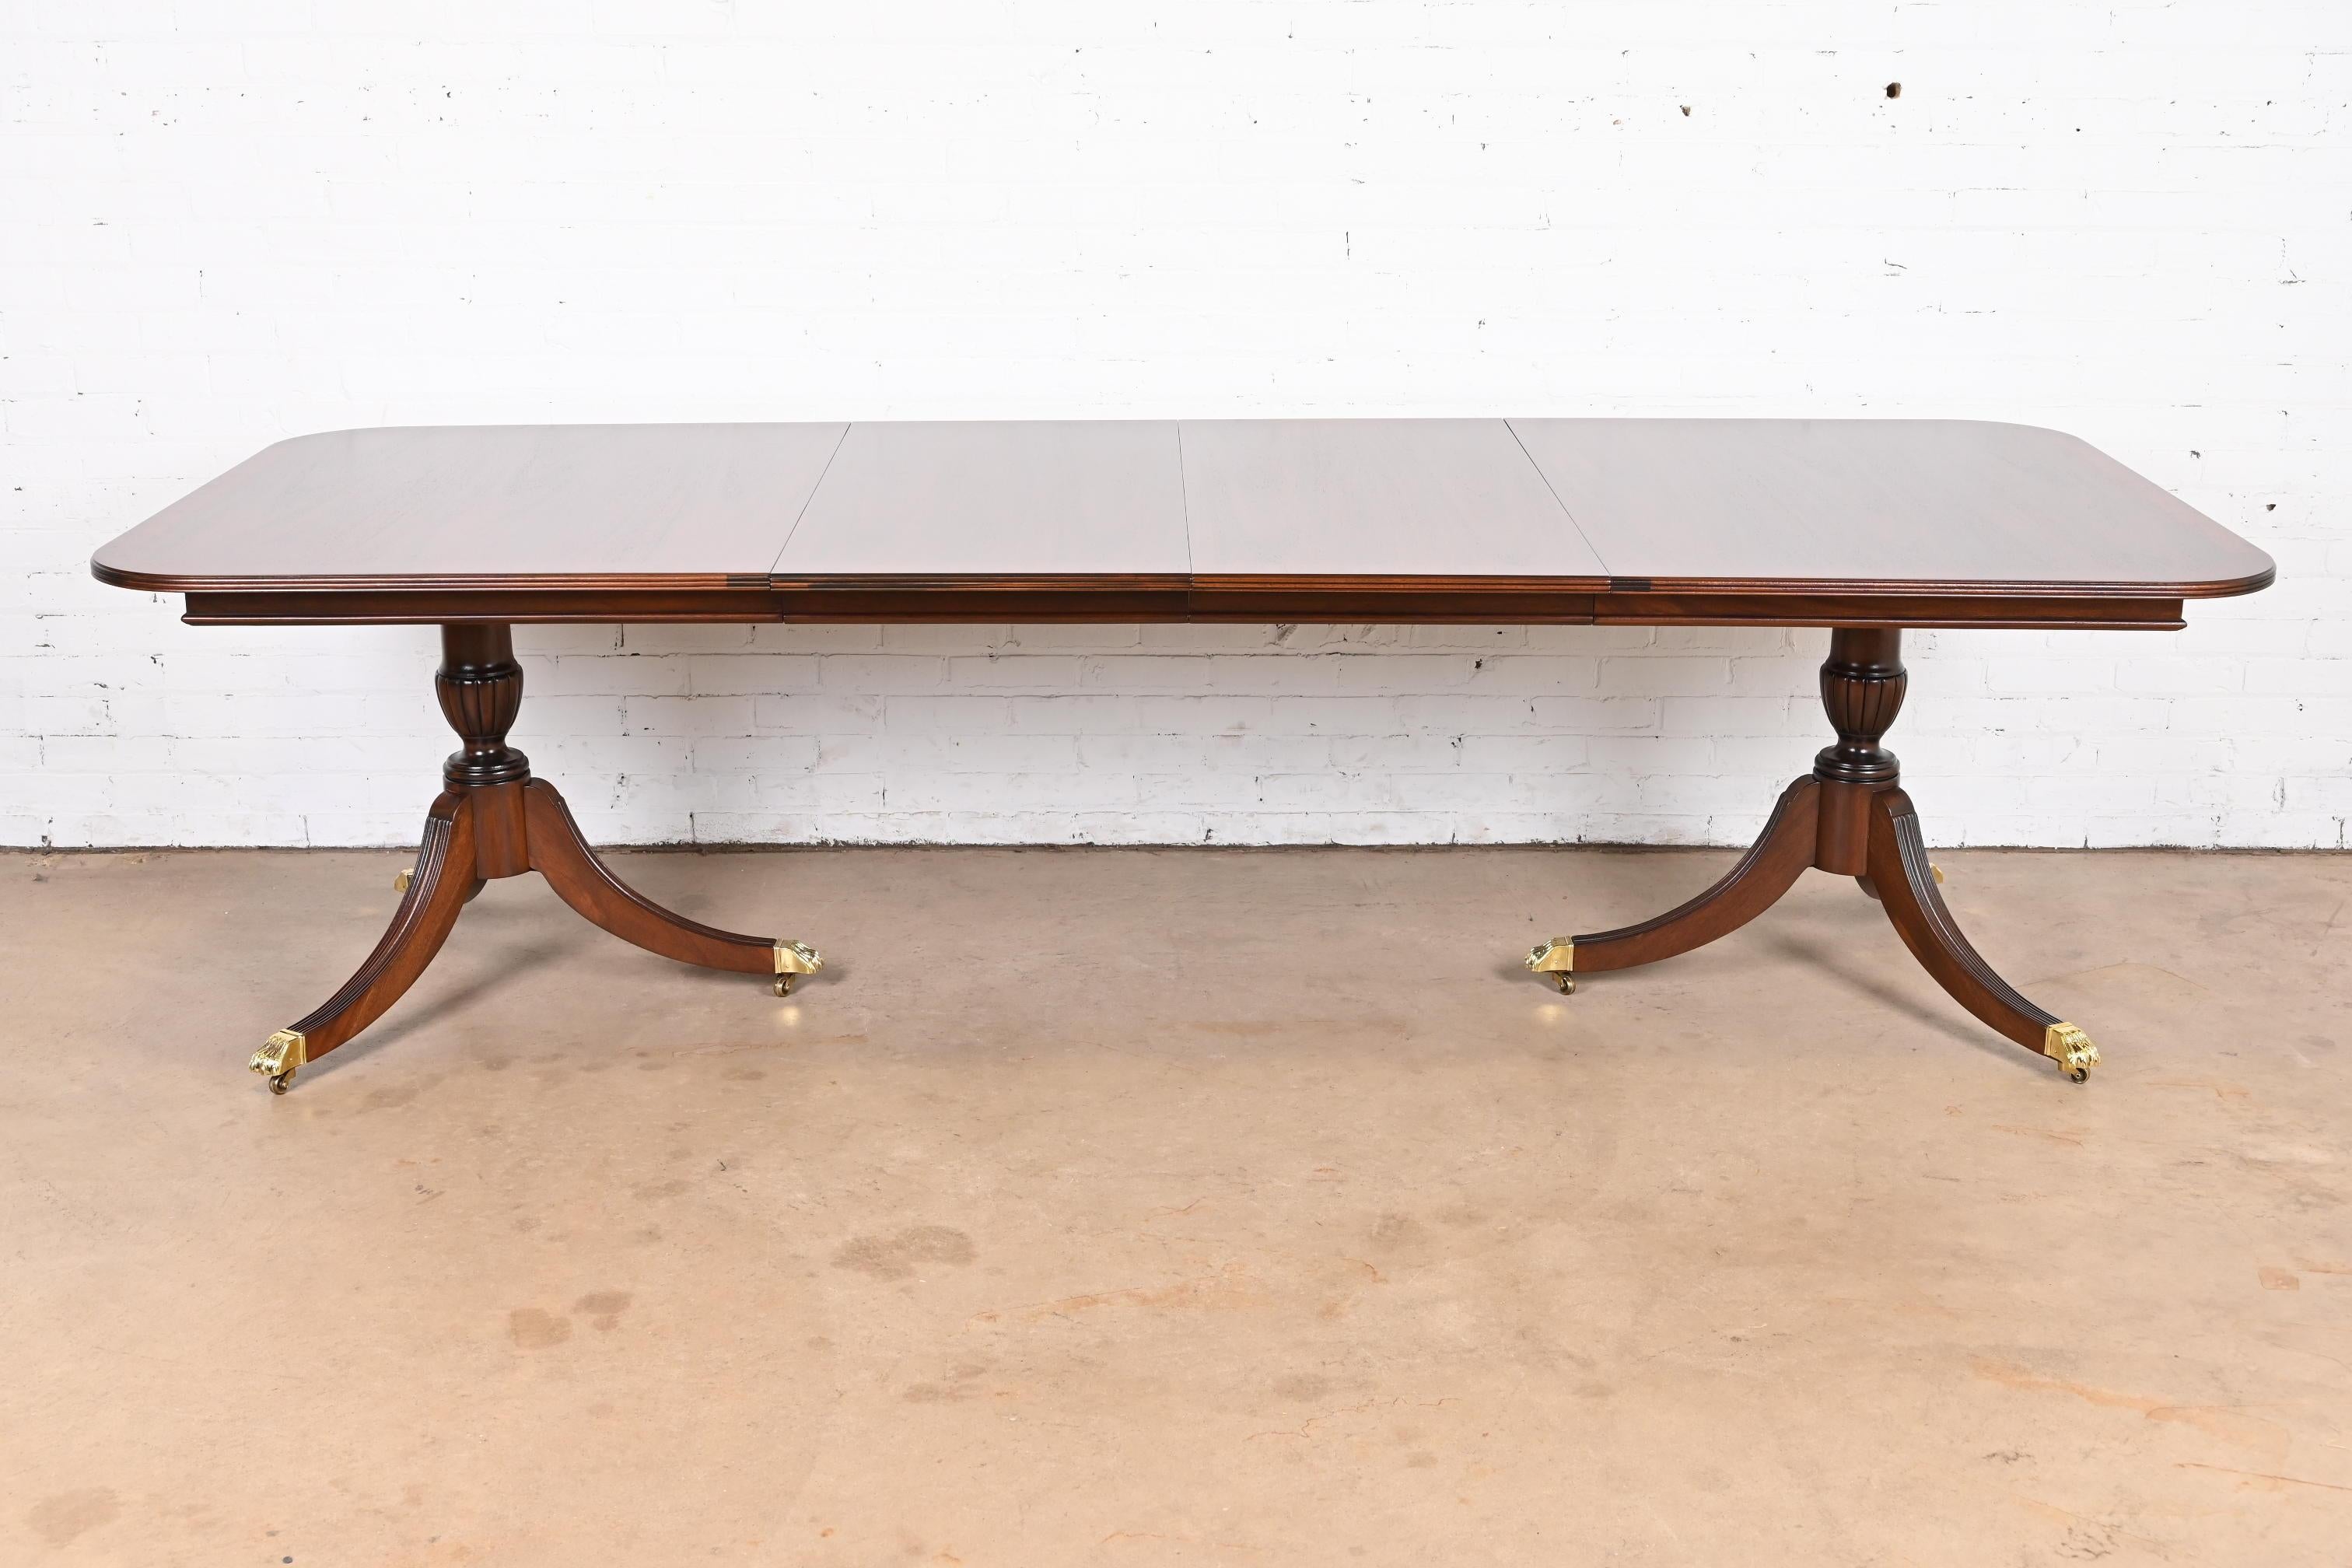 An exceptional Georgian or Regency style double pedestal extension dining table

In the manner of Baker Furniture

USA, Circa 1980s

Gorgeous book-matched banded mahogany top, with carved solid mahogany pedestals, brass-capped paw feet, and brass